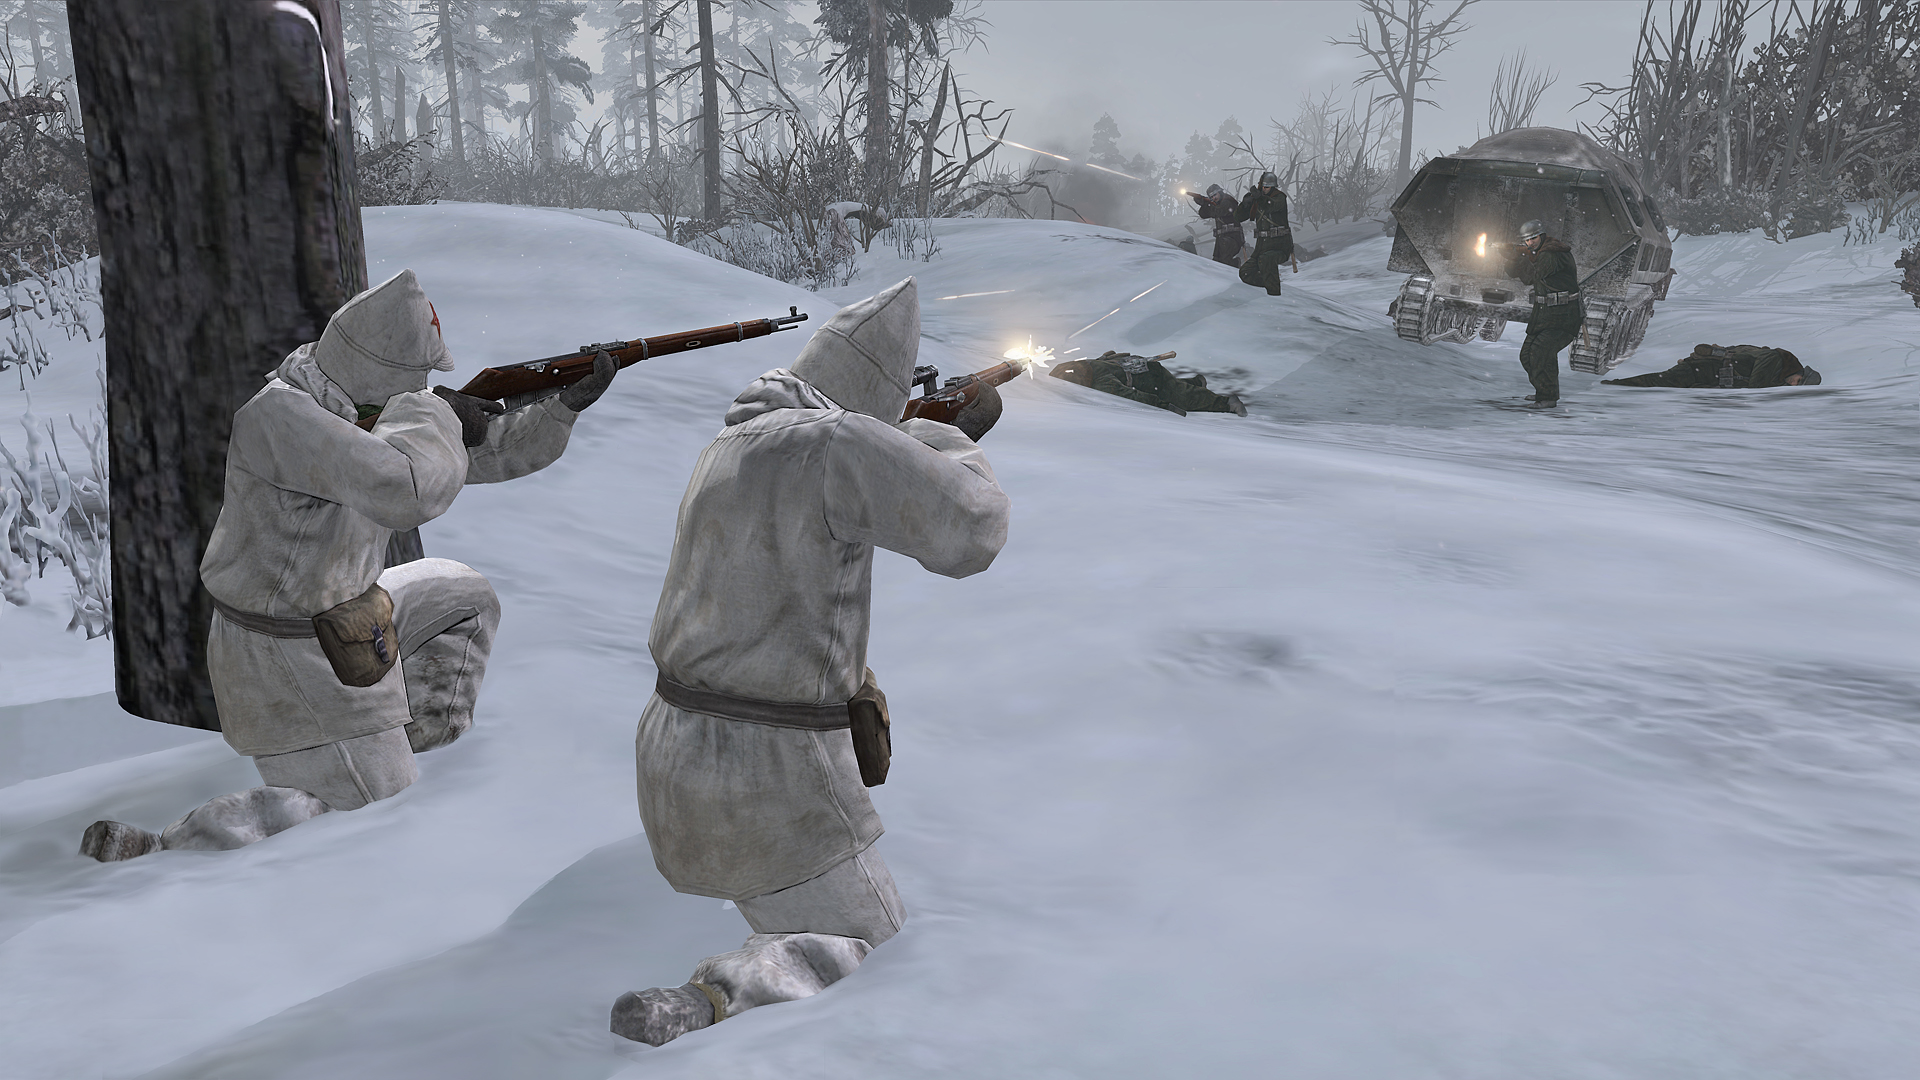 Company of Heroes 2s unbelievably realistic ColdTech system turns winter into your enemy